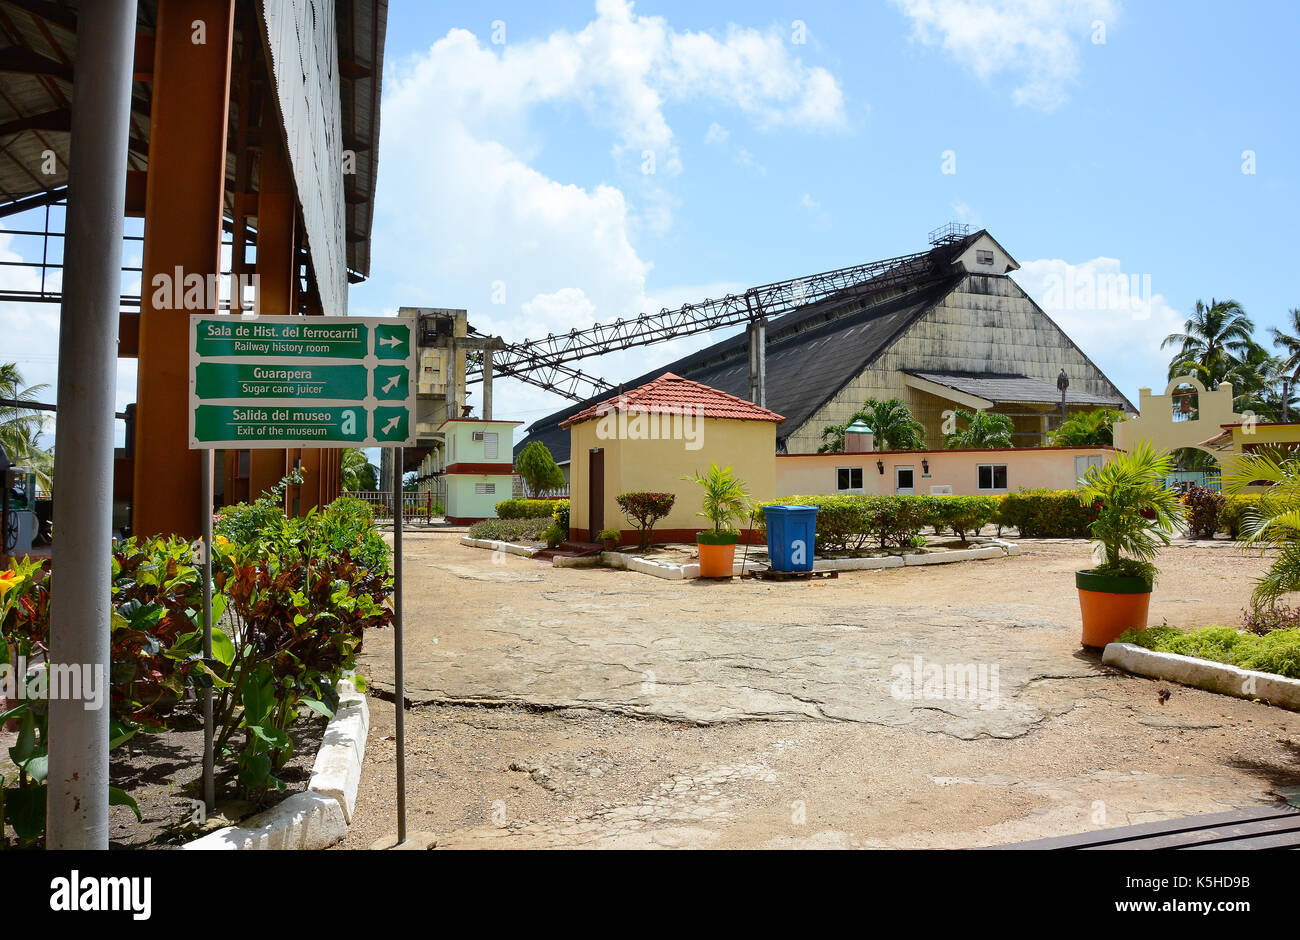 REMEDIOS, CUBA - JULY 27, 2016: The Museum of Sugar Industry and Museum of Steam at Remedios, is an old Cuban sugar mill with its own railway. Stock Photo